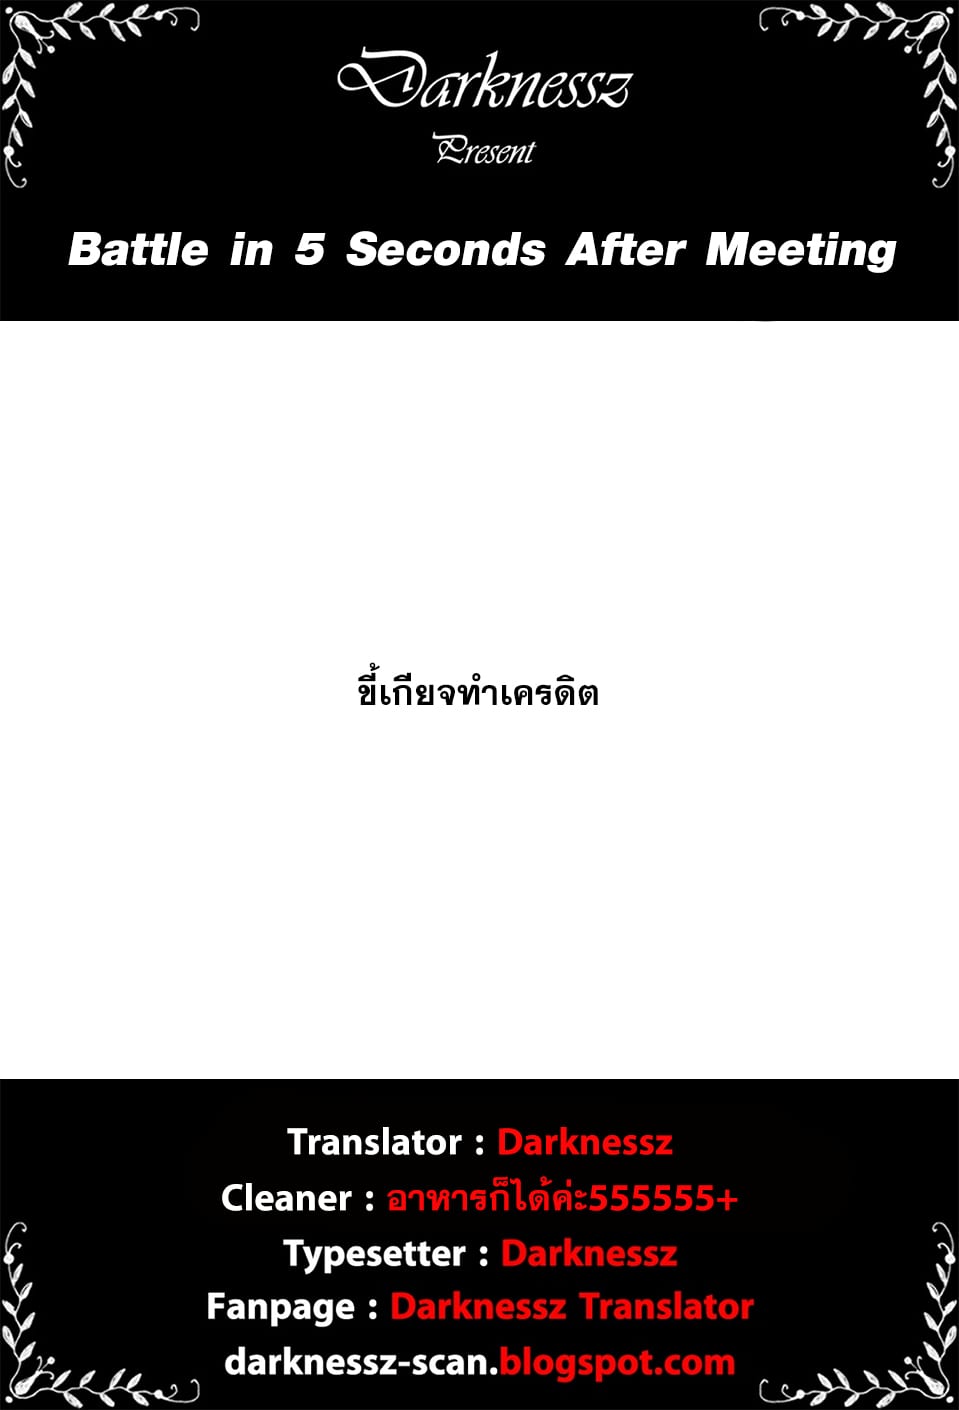 Battle in 5 Seconds After Meeting